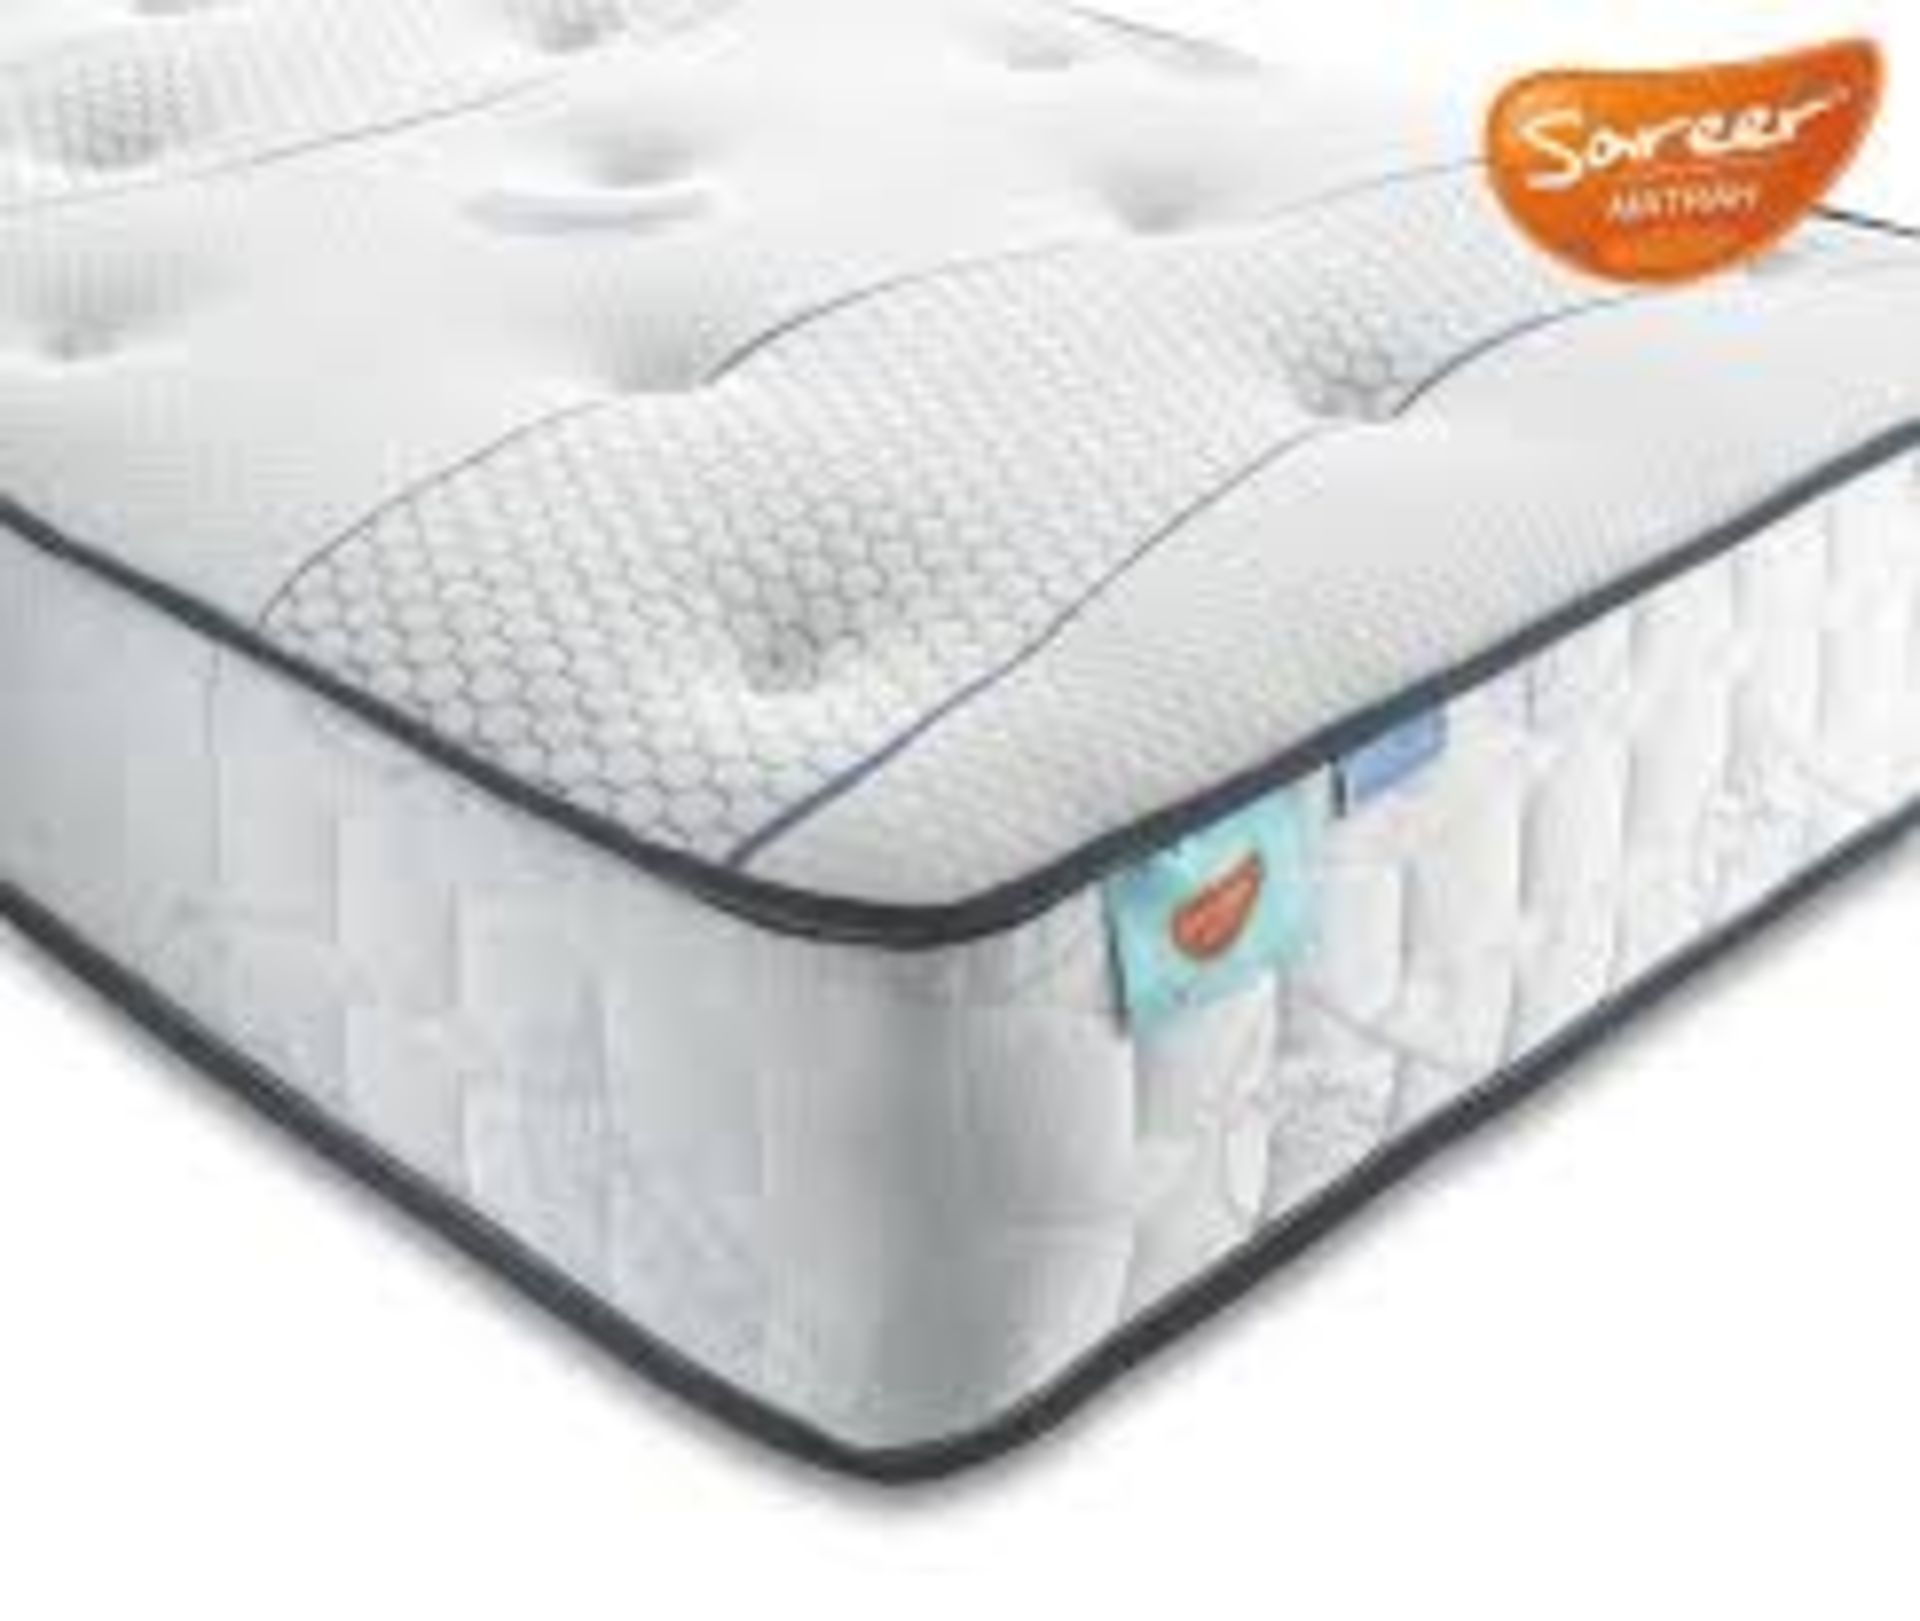 Sereka 150 x190cm Coil Spring Mattress RRP £175 (18350) (Appraisals Available Upon Request)